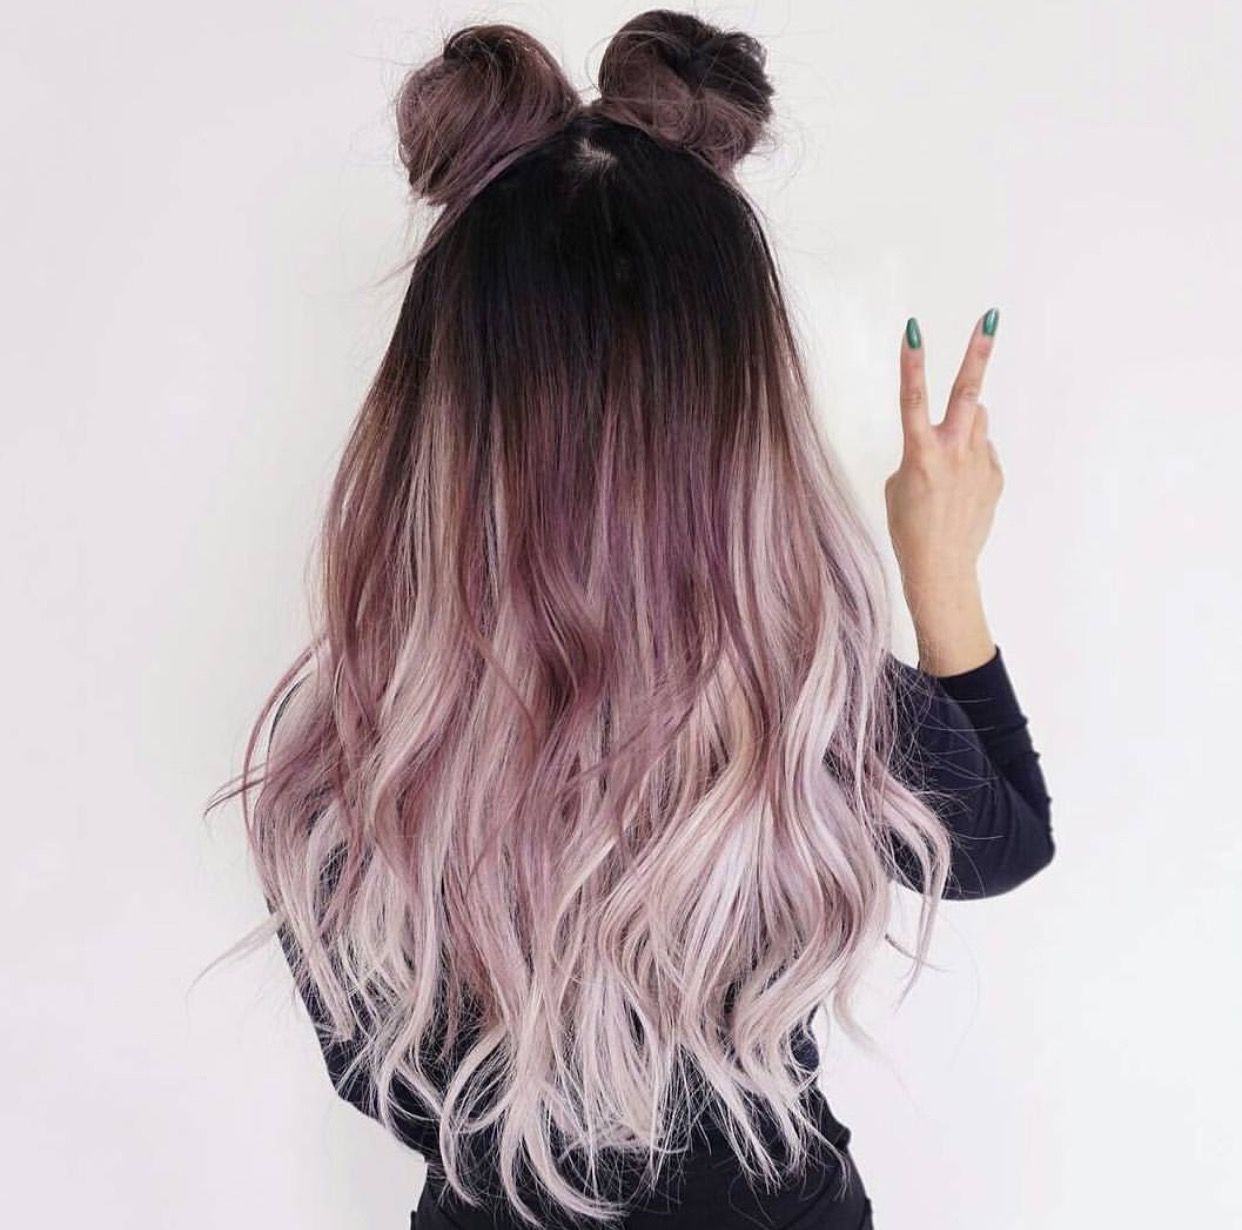 Cute Dyed Hairstyles
 Awesome rockin hairstyle and color Ombre dark to light